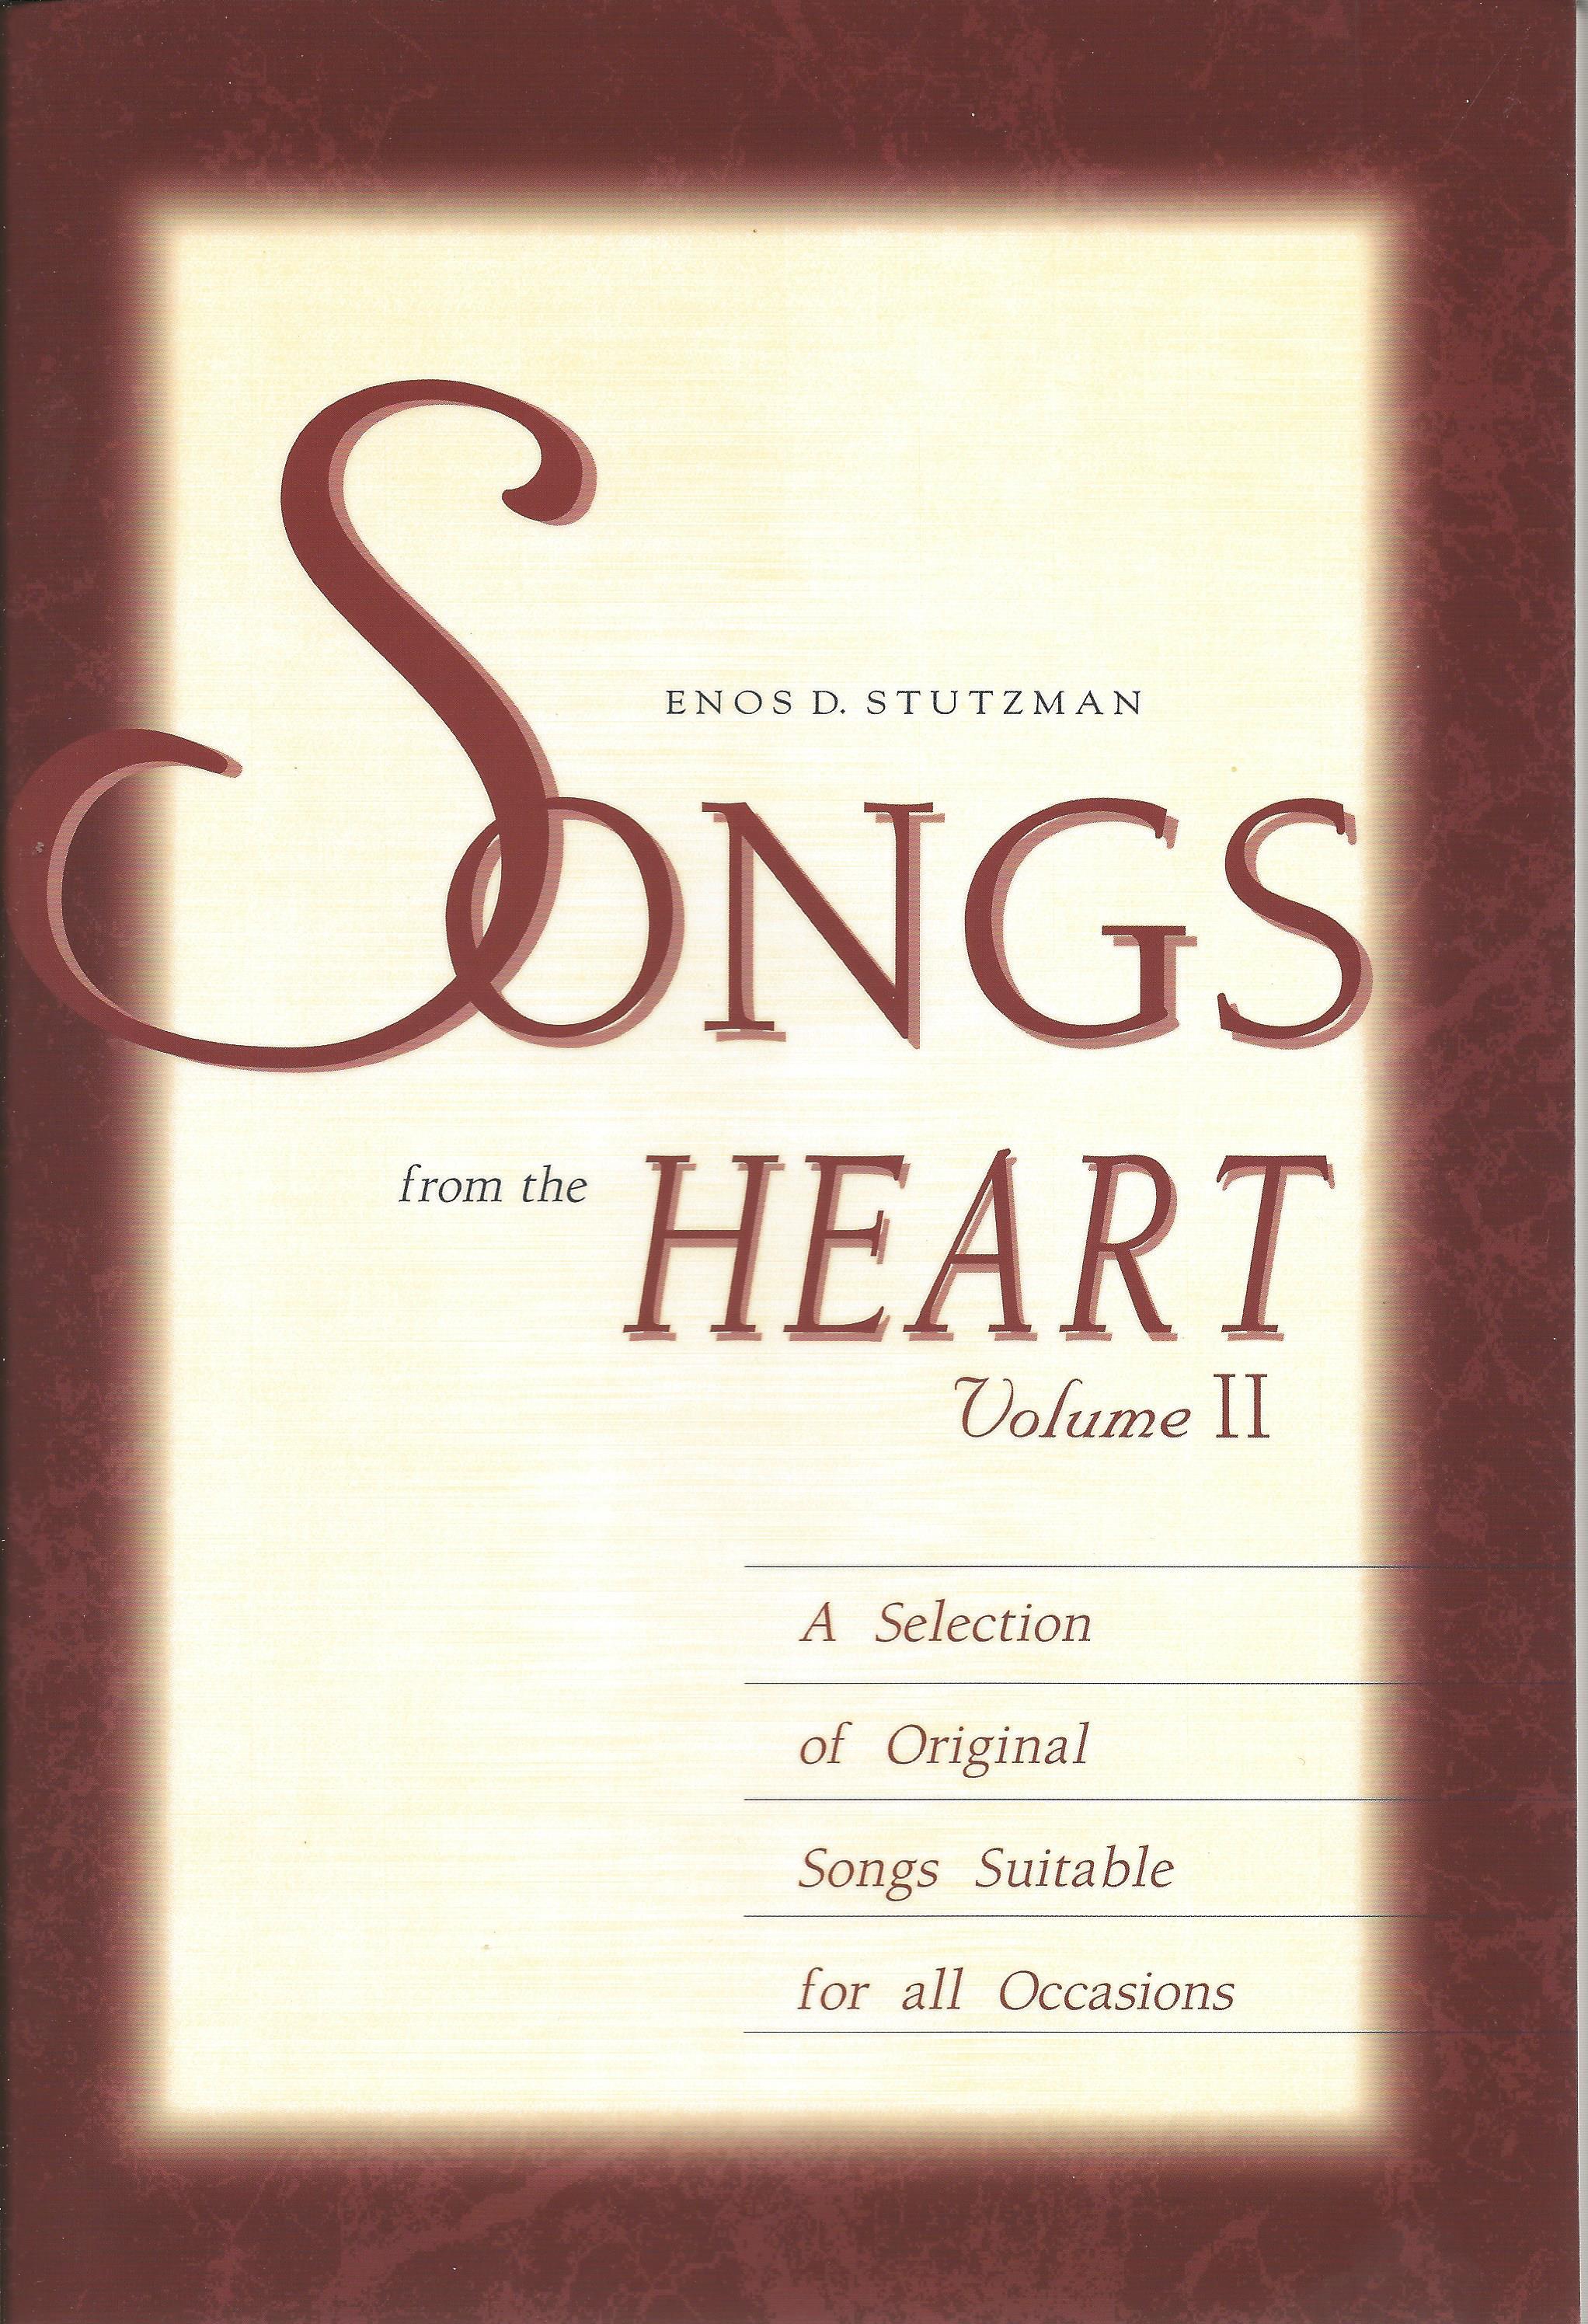 SONGS FROM THE HEART VOLUME II Enos Stutzman